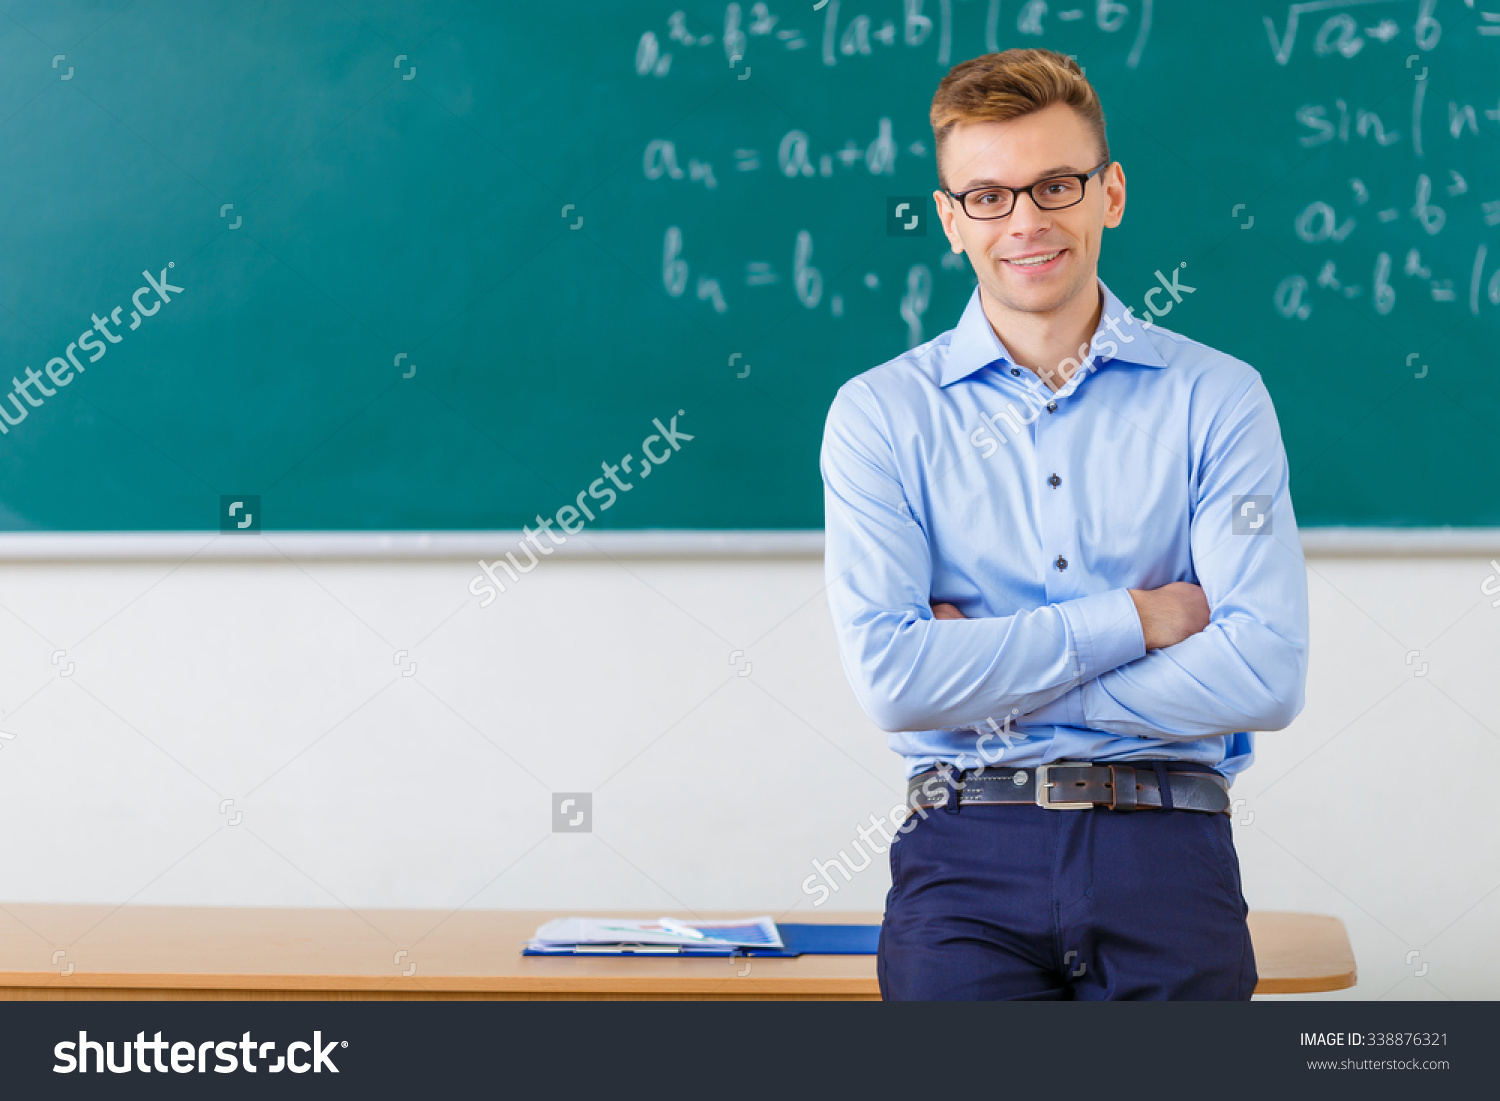 stock-photo-college-professor-handsome-young-college-professor-smiles-charmingly-while-folding-his-arms-and-338876321